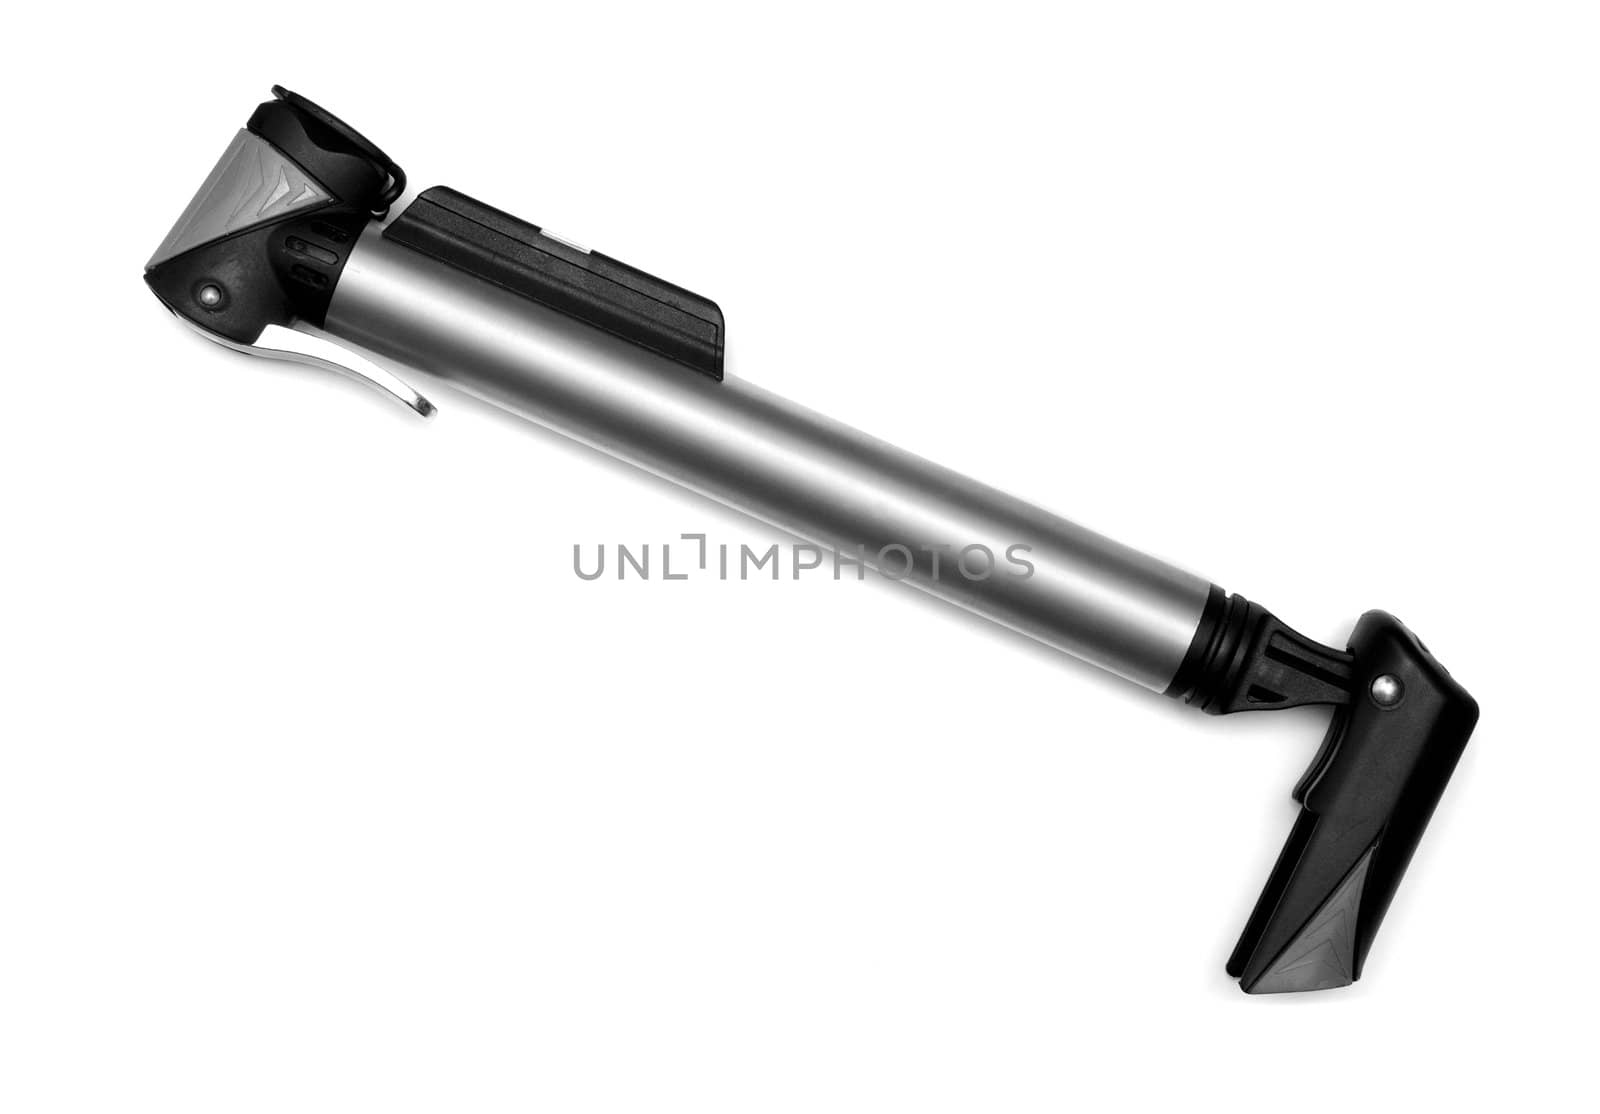 bicycle pump isolated on white background